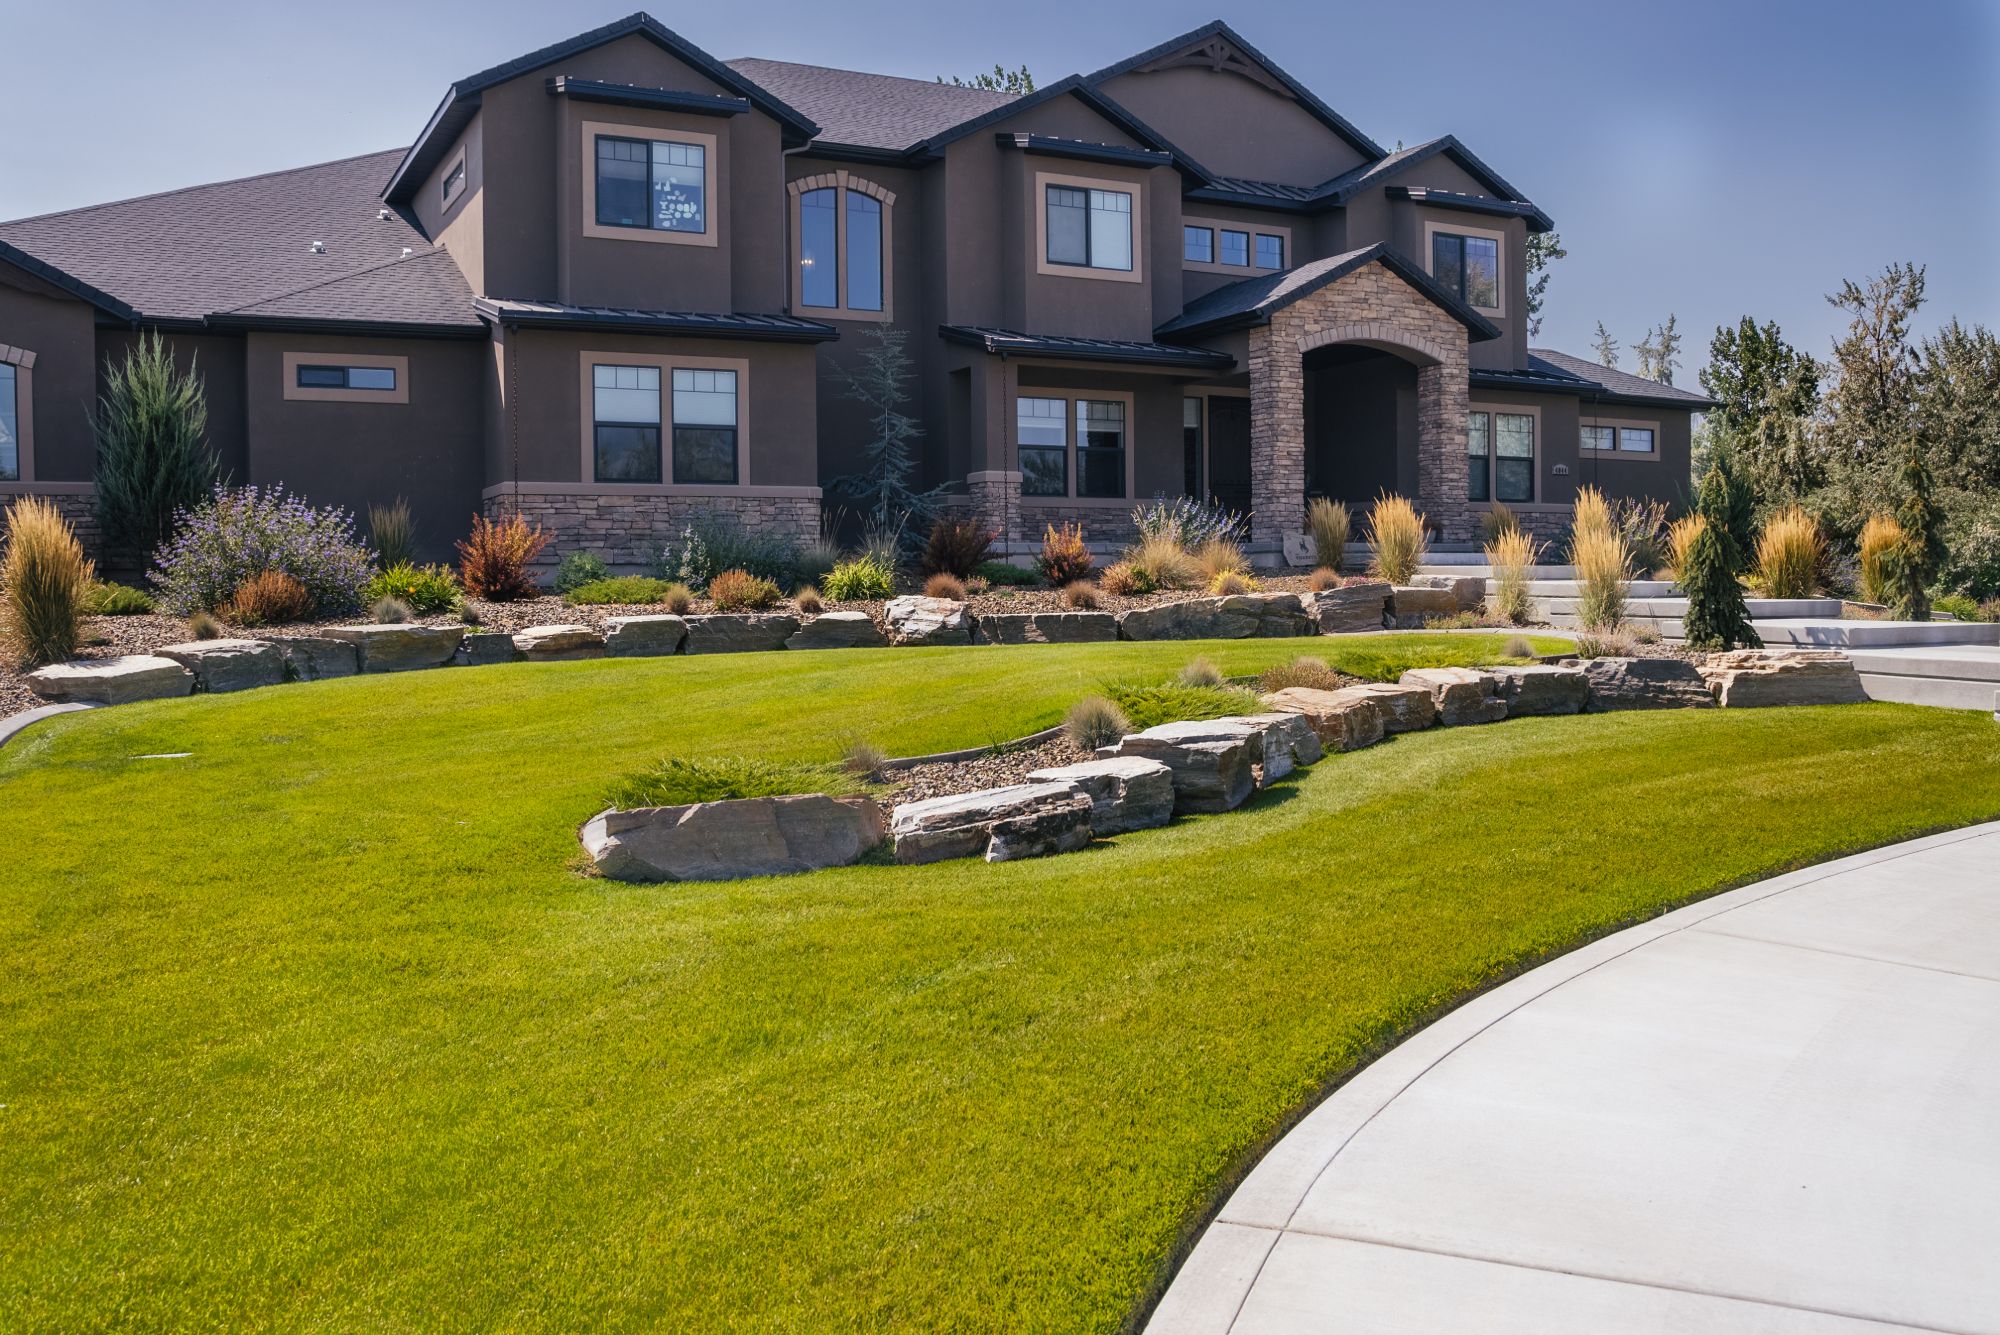 Expert residential landscaping done by Rustic Ridge Landscapes near Twin Falls, ID.